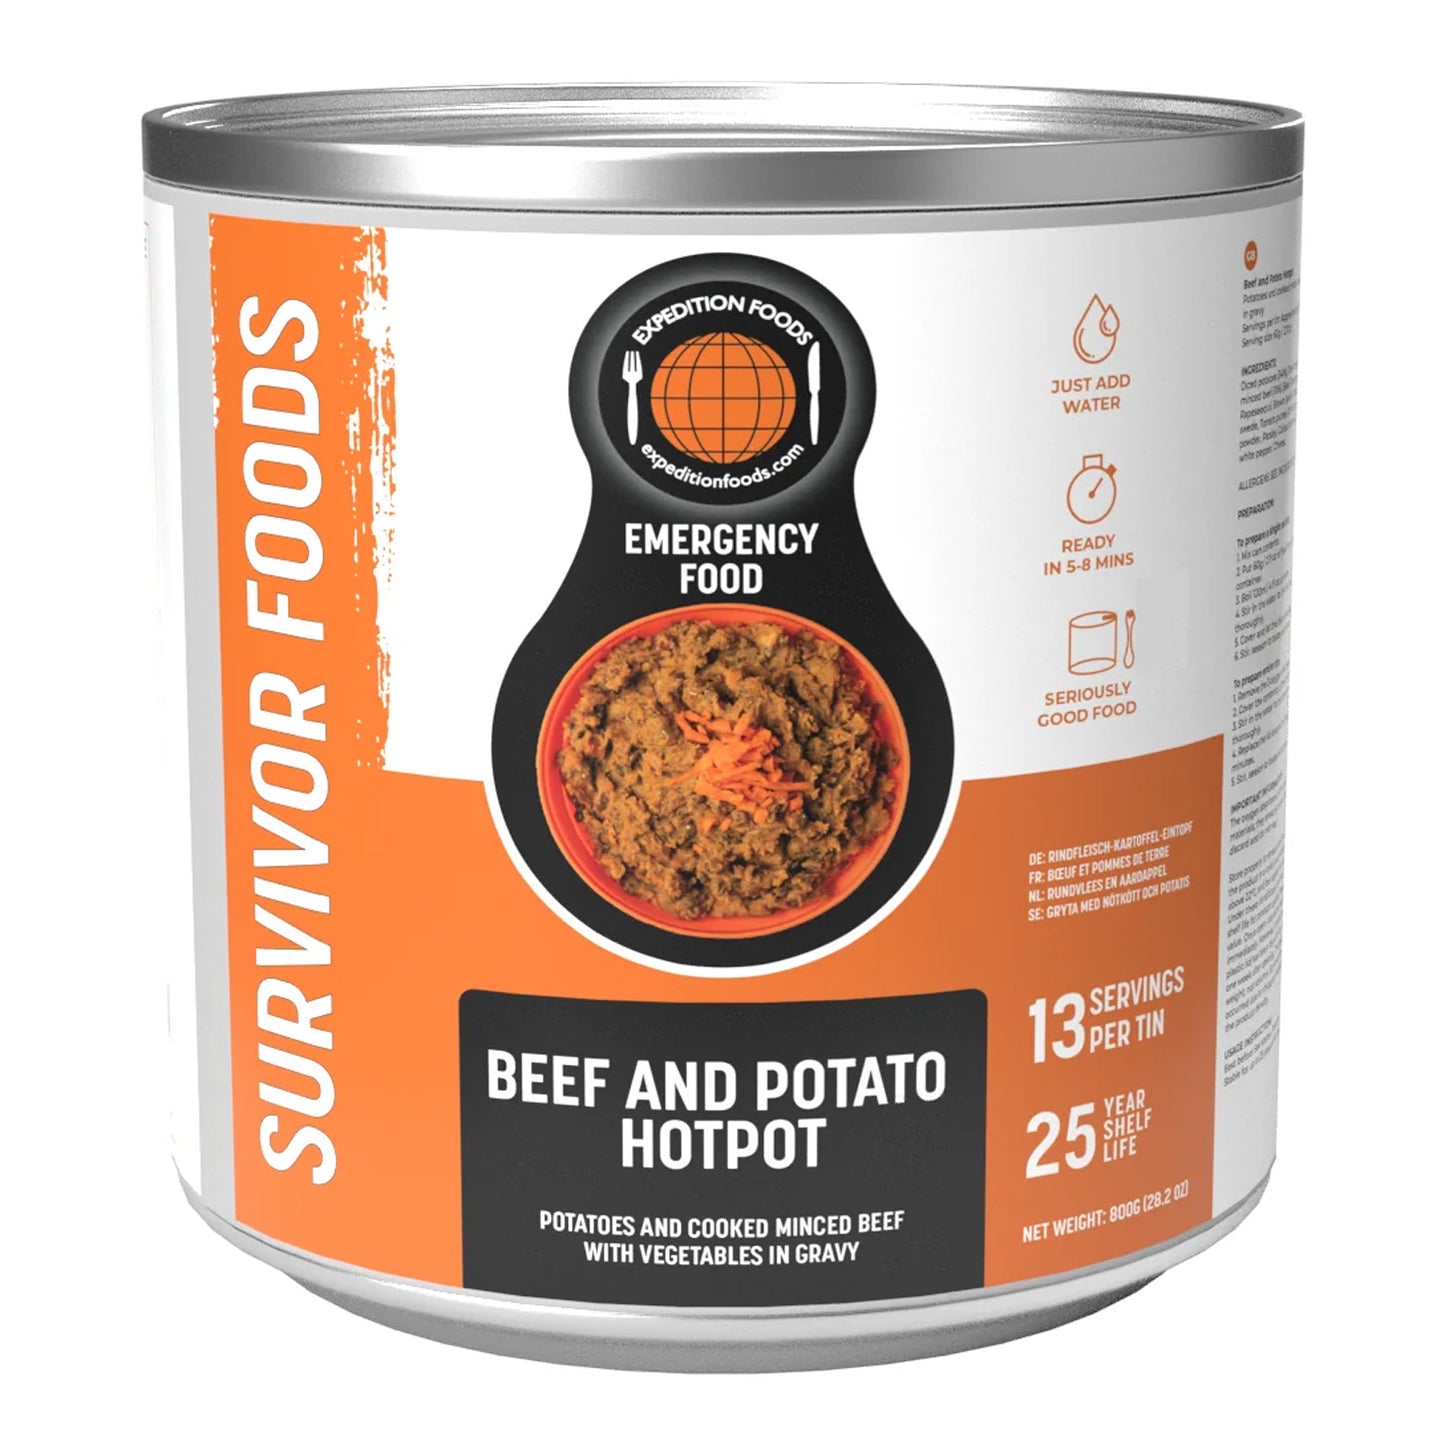 Expedition Foods Beef and Potato Hotpot Meal Tins